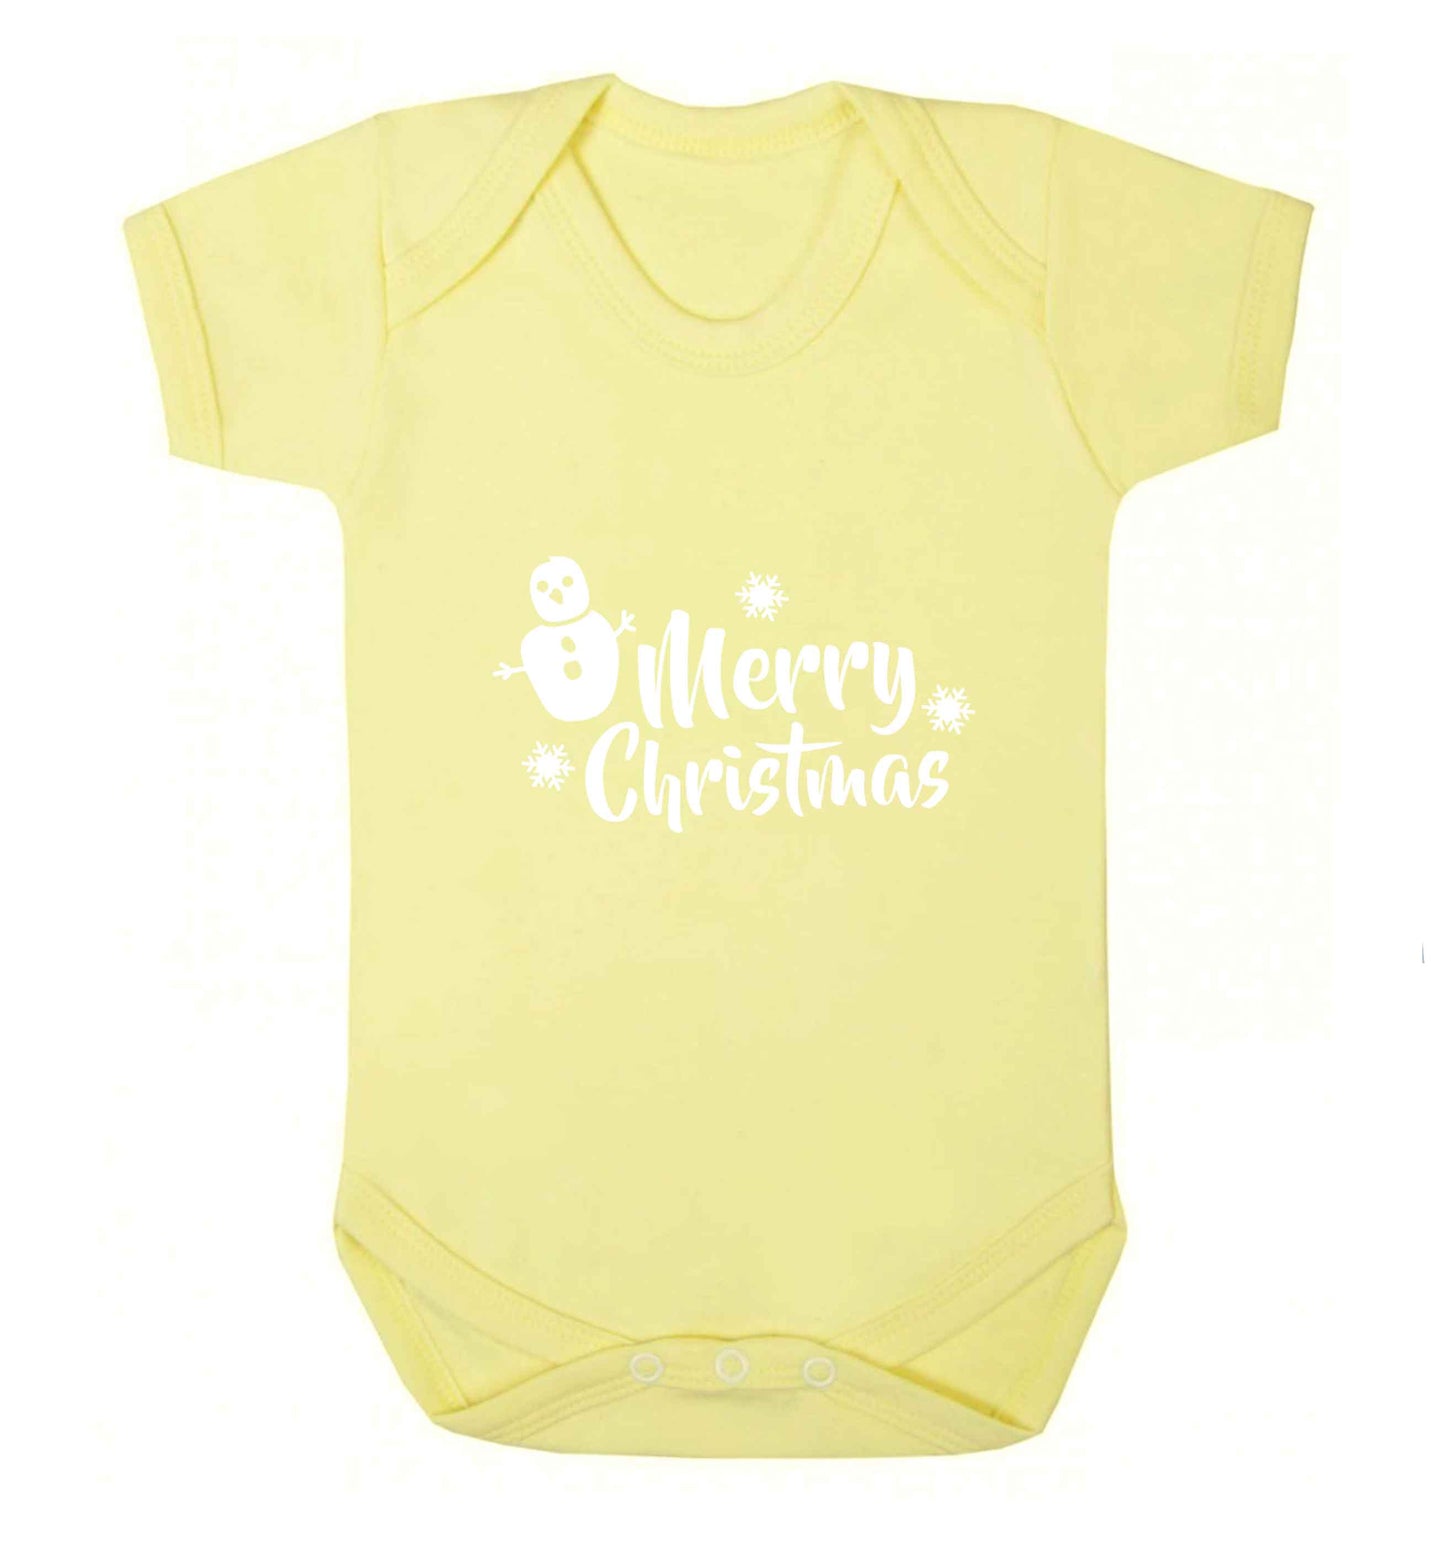 Merry Christmas - snowman baby vest pale yellow 18-24 months